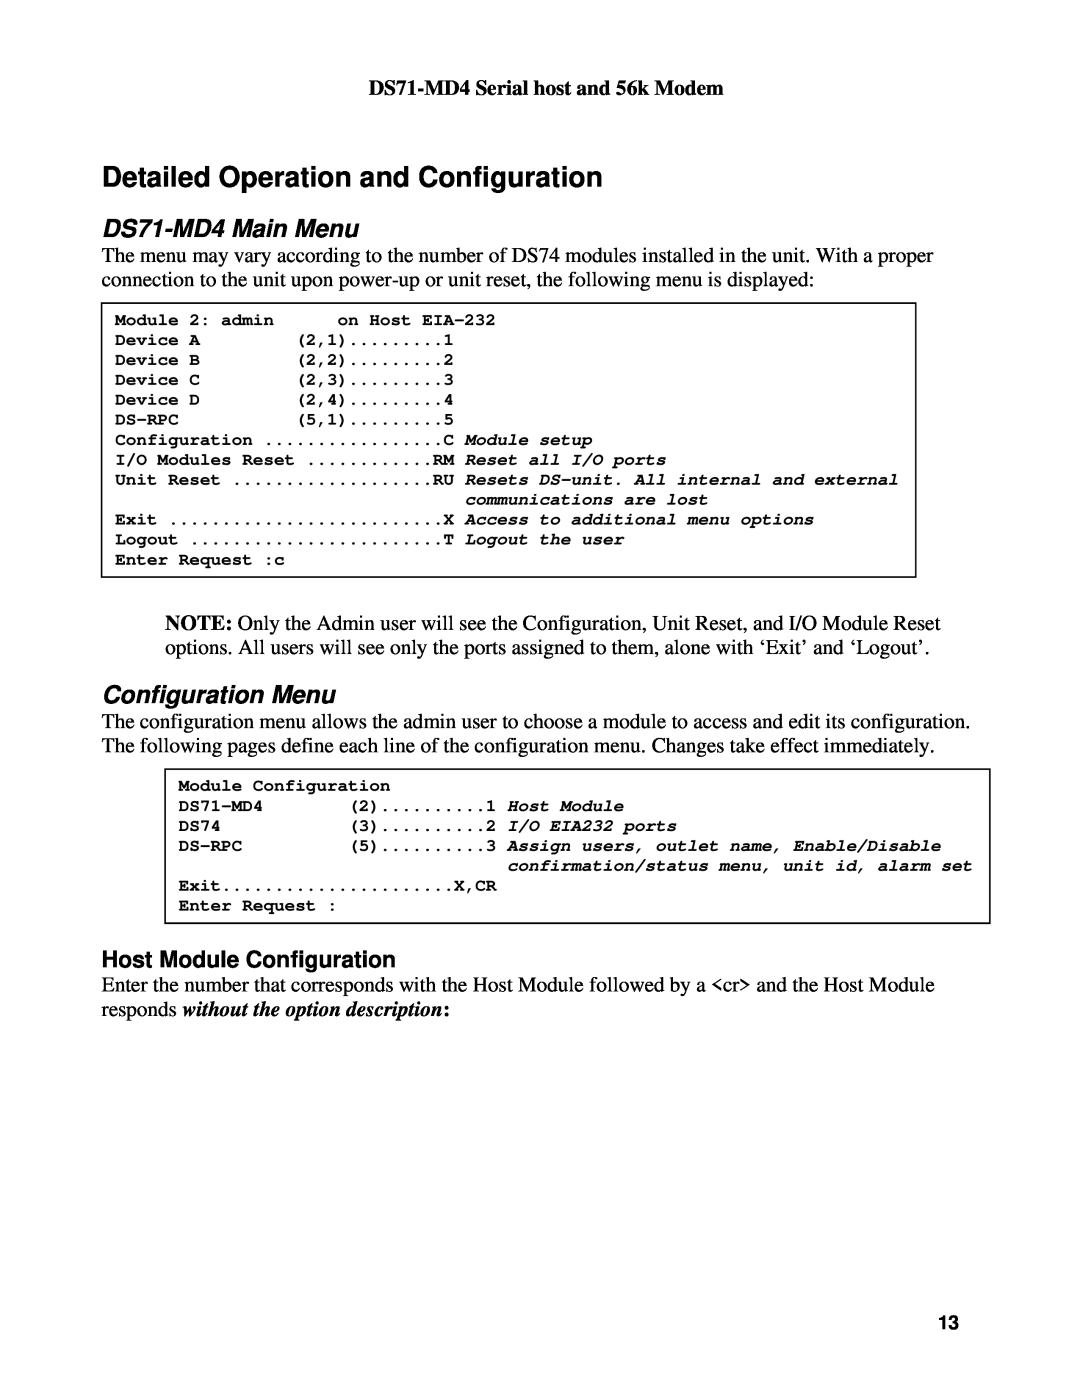 Cisco Systems DS Series manual Detailed Operation and Configuration, DS71-MD4 Main Menu, Configuration Menu 